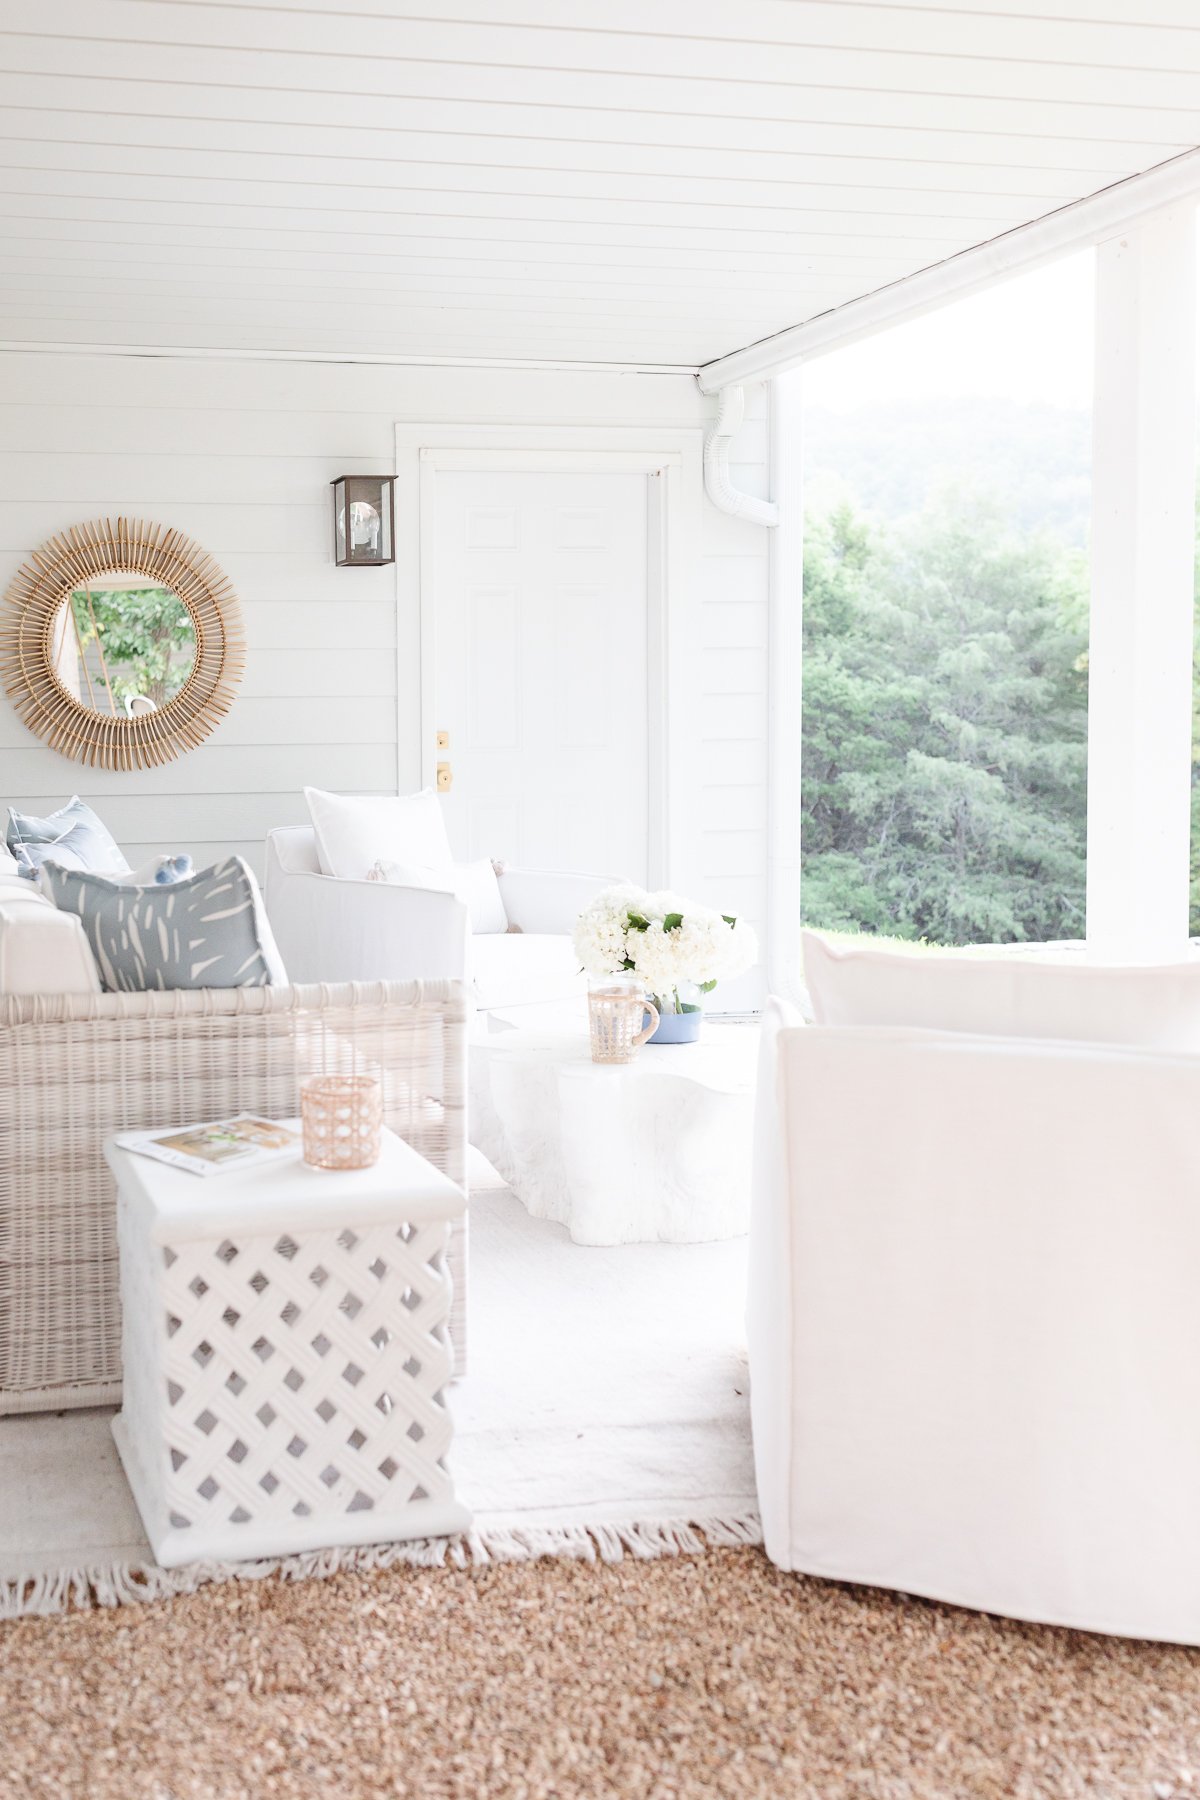 A white porch with wicker furniture and a mirror adorned with outdoor pillows.